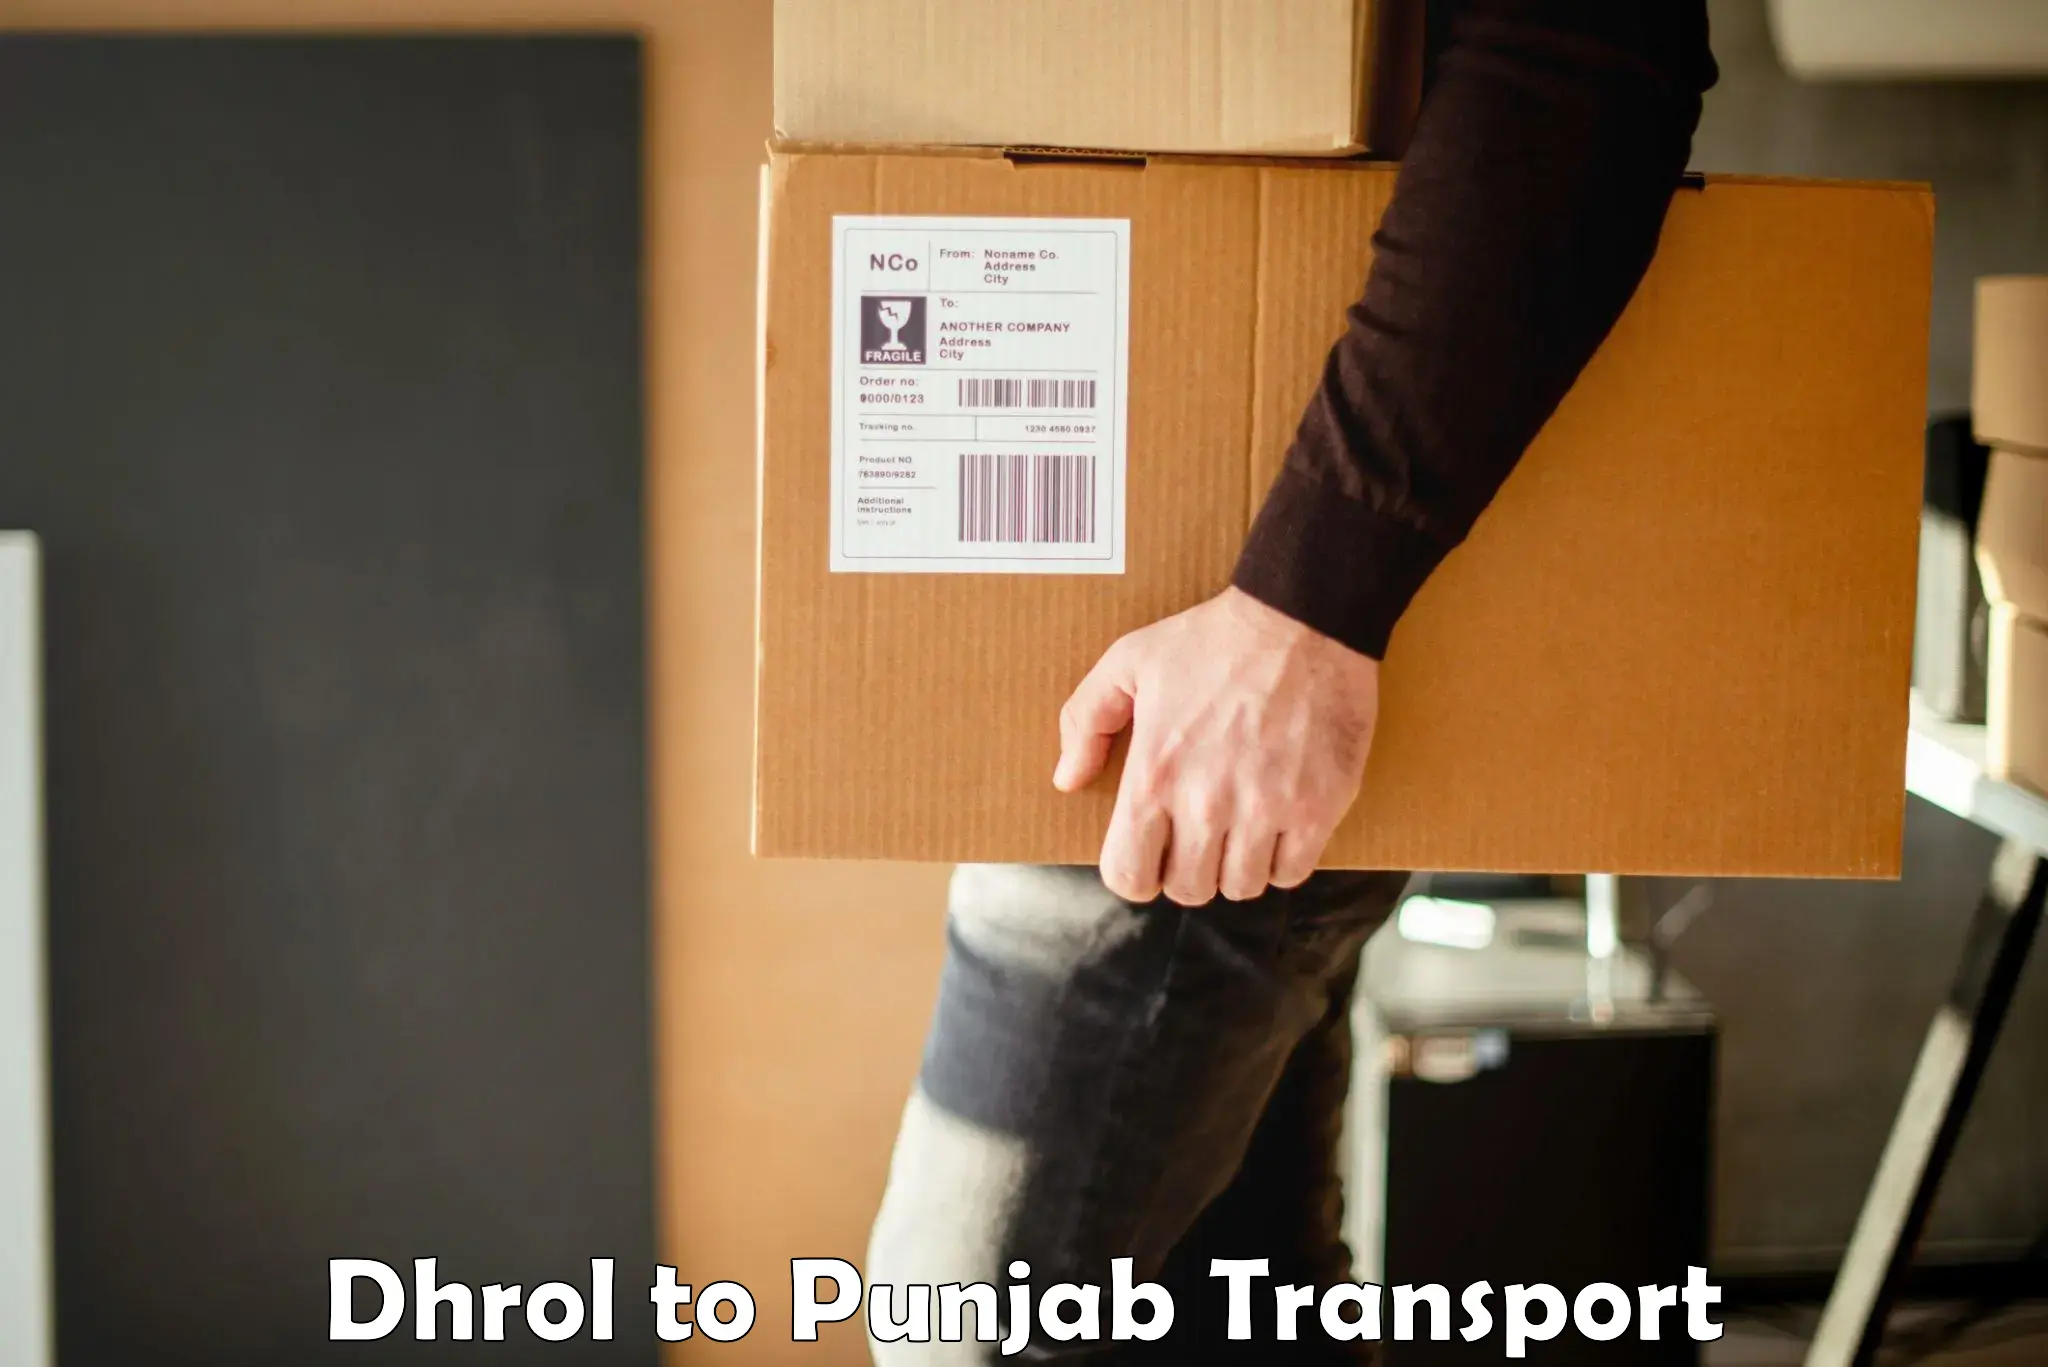 Express transport services Dhrol to Dhilwan